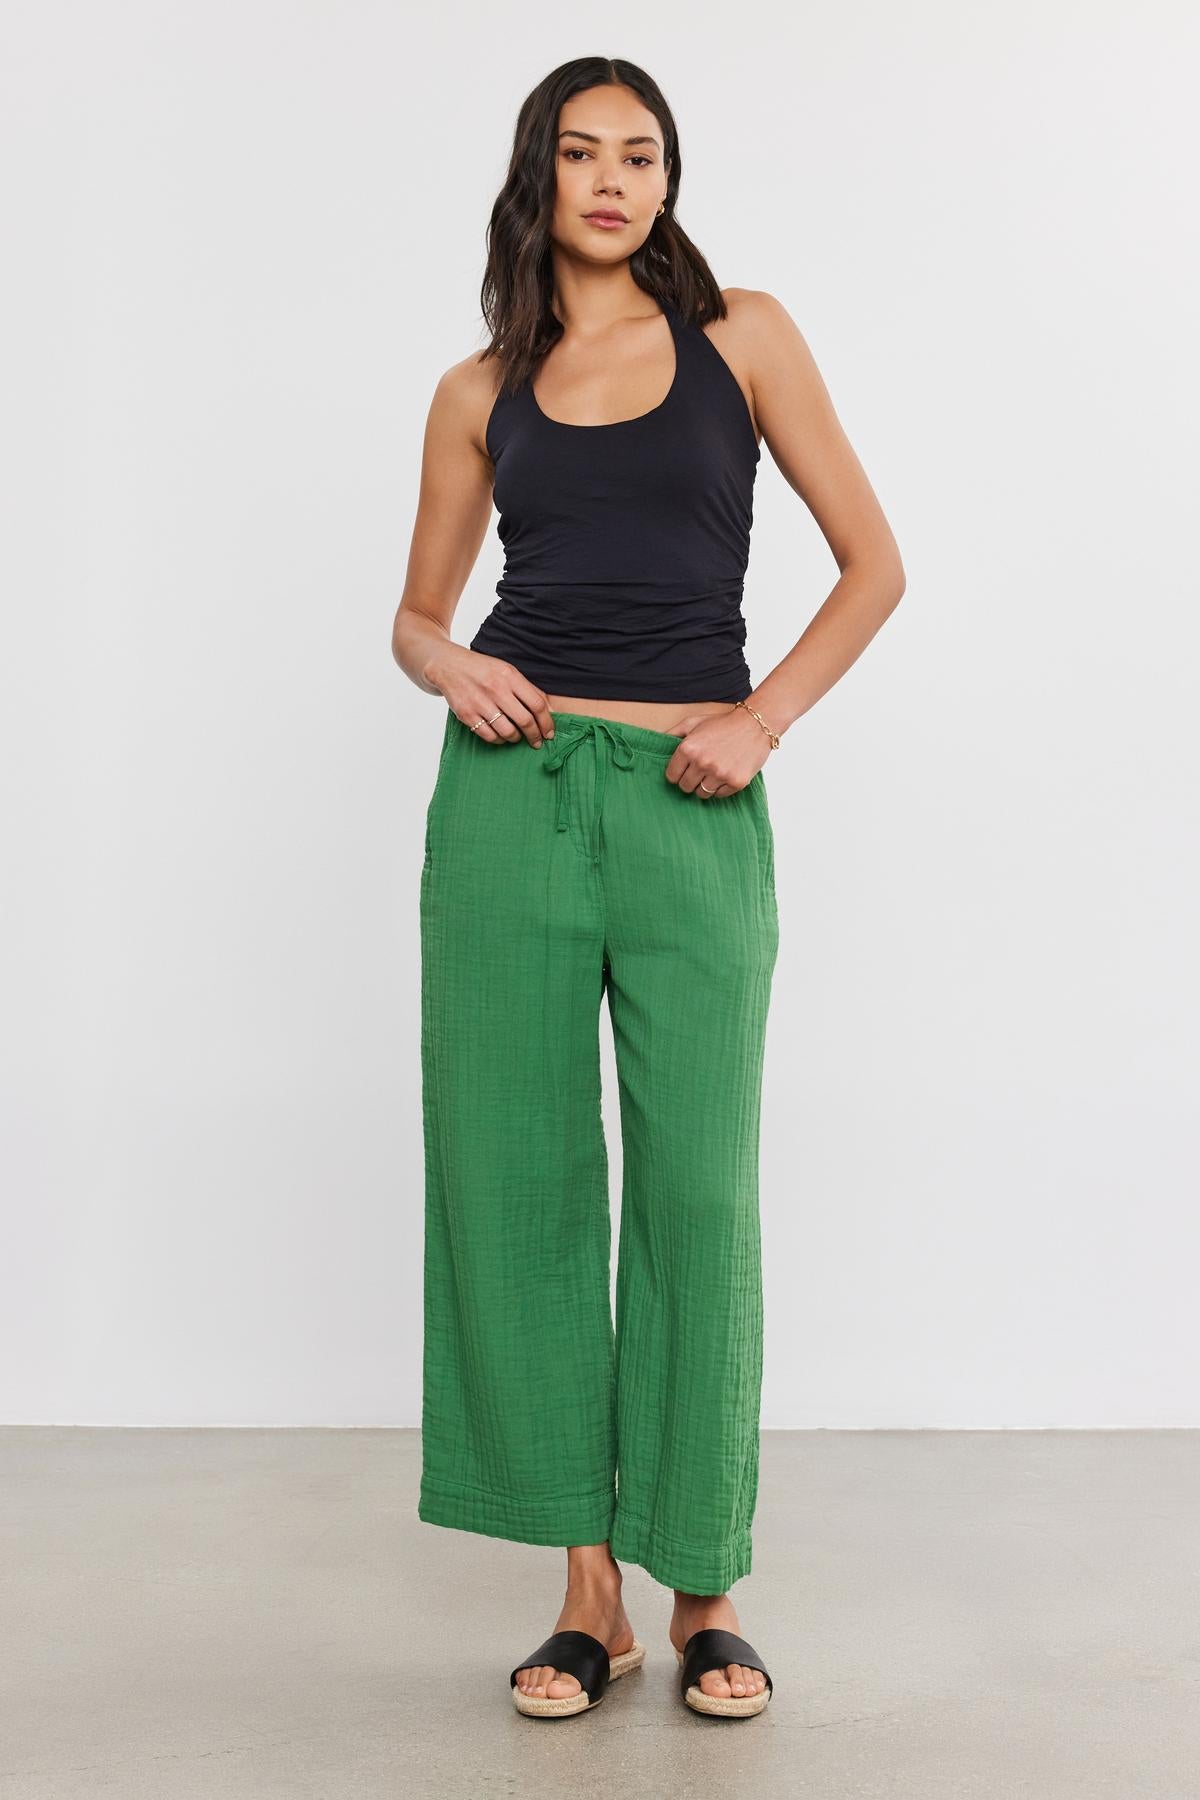   A woman stands confidently, wearing black tank top and Velvet by Graham & Spencer FRANNY COTTON GAUZE PANTS with relaxed legs and slash pockets, paired with black sandals. She's posing in a plain studio setting. 